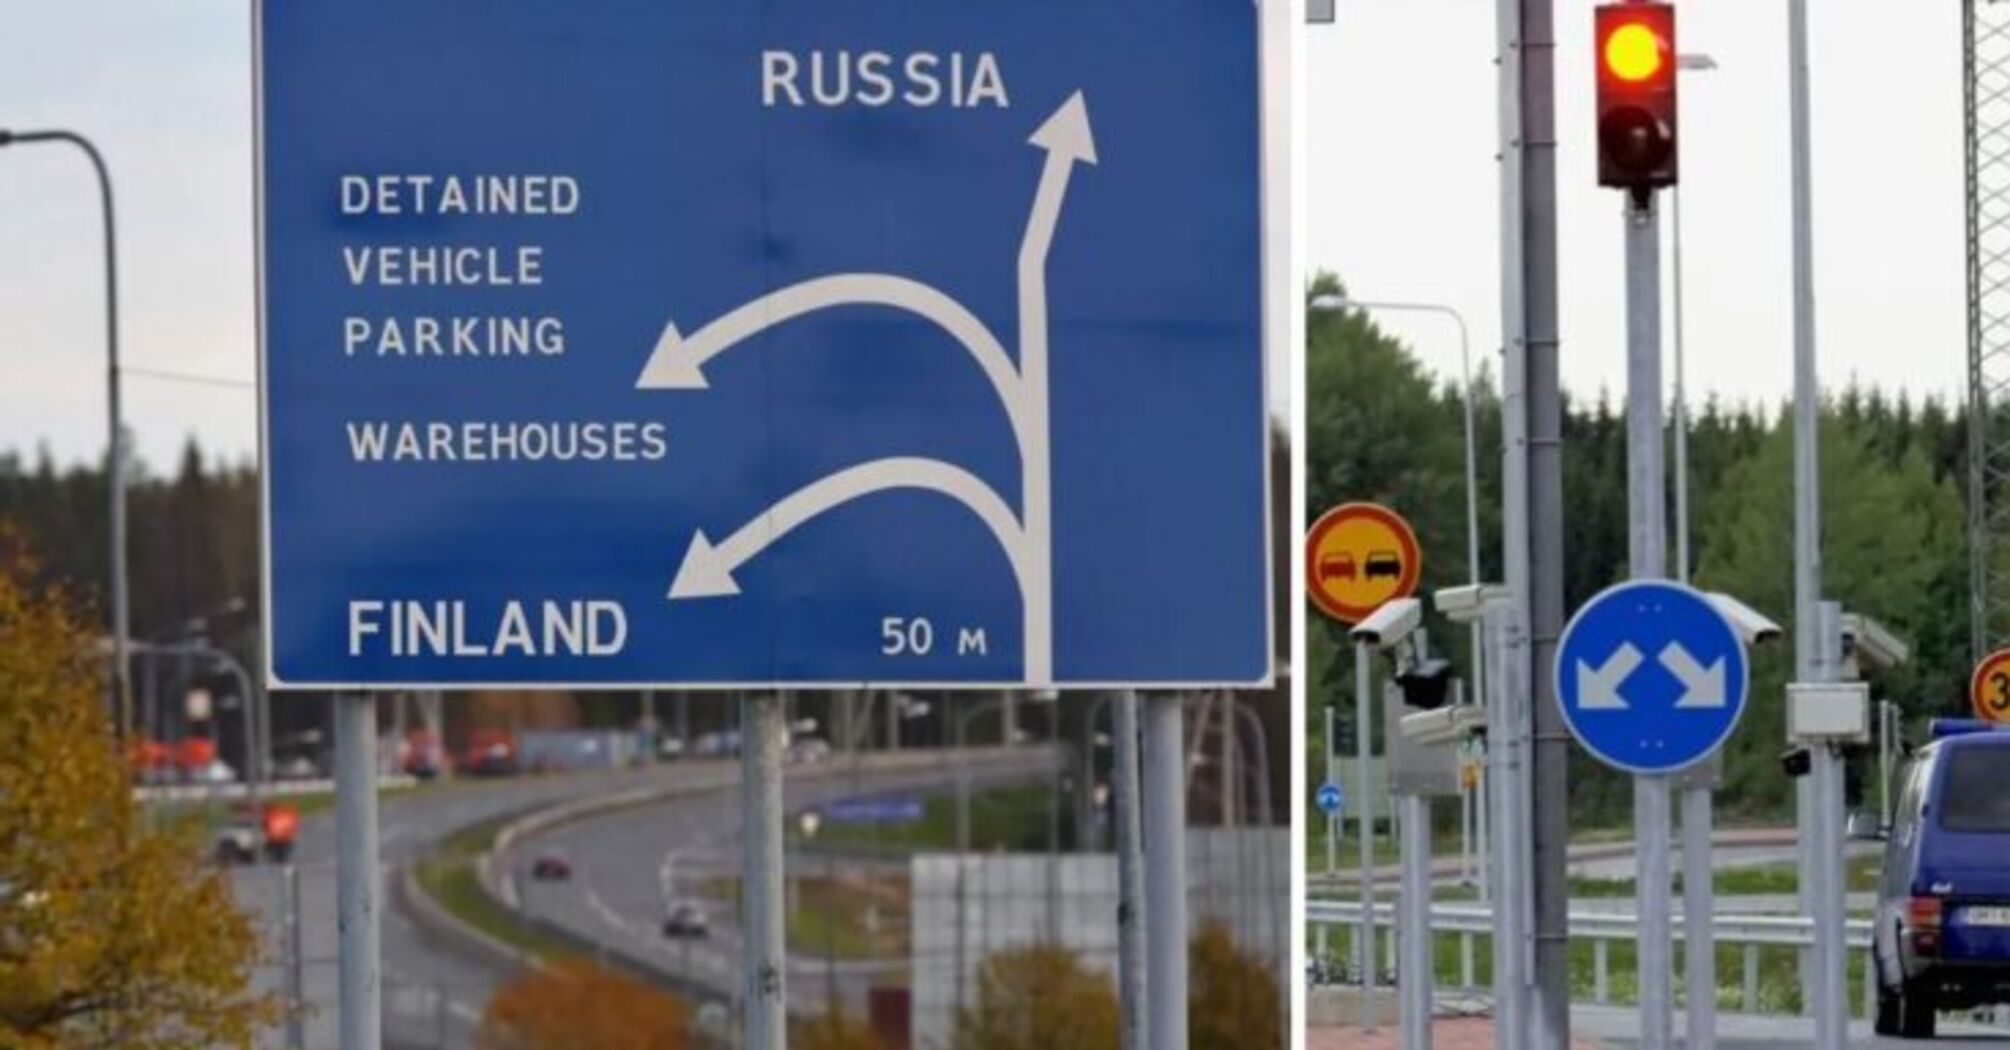 Finland will not open checkpoints on the border with Russia